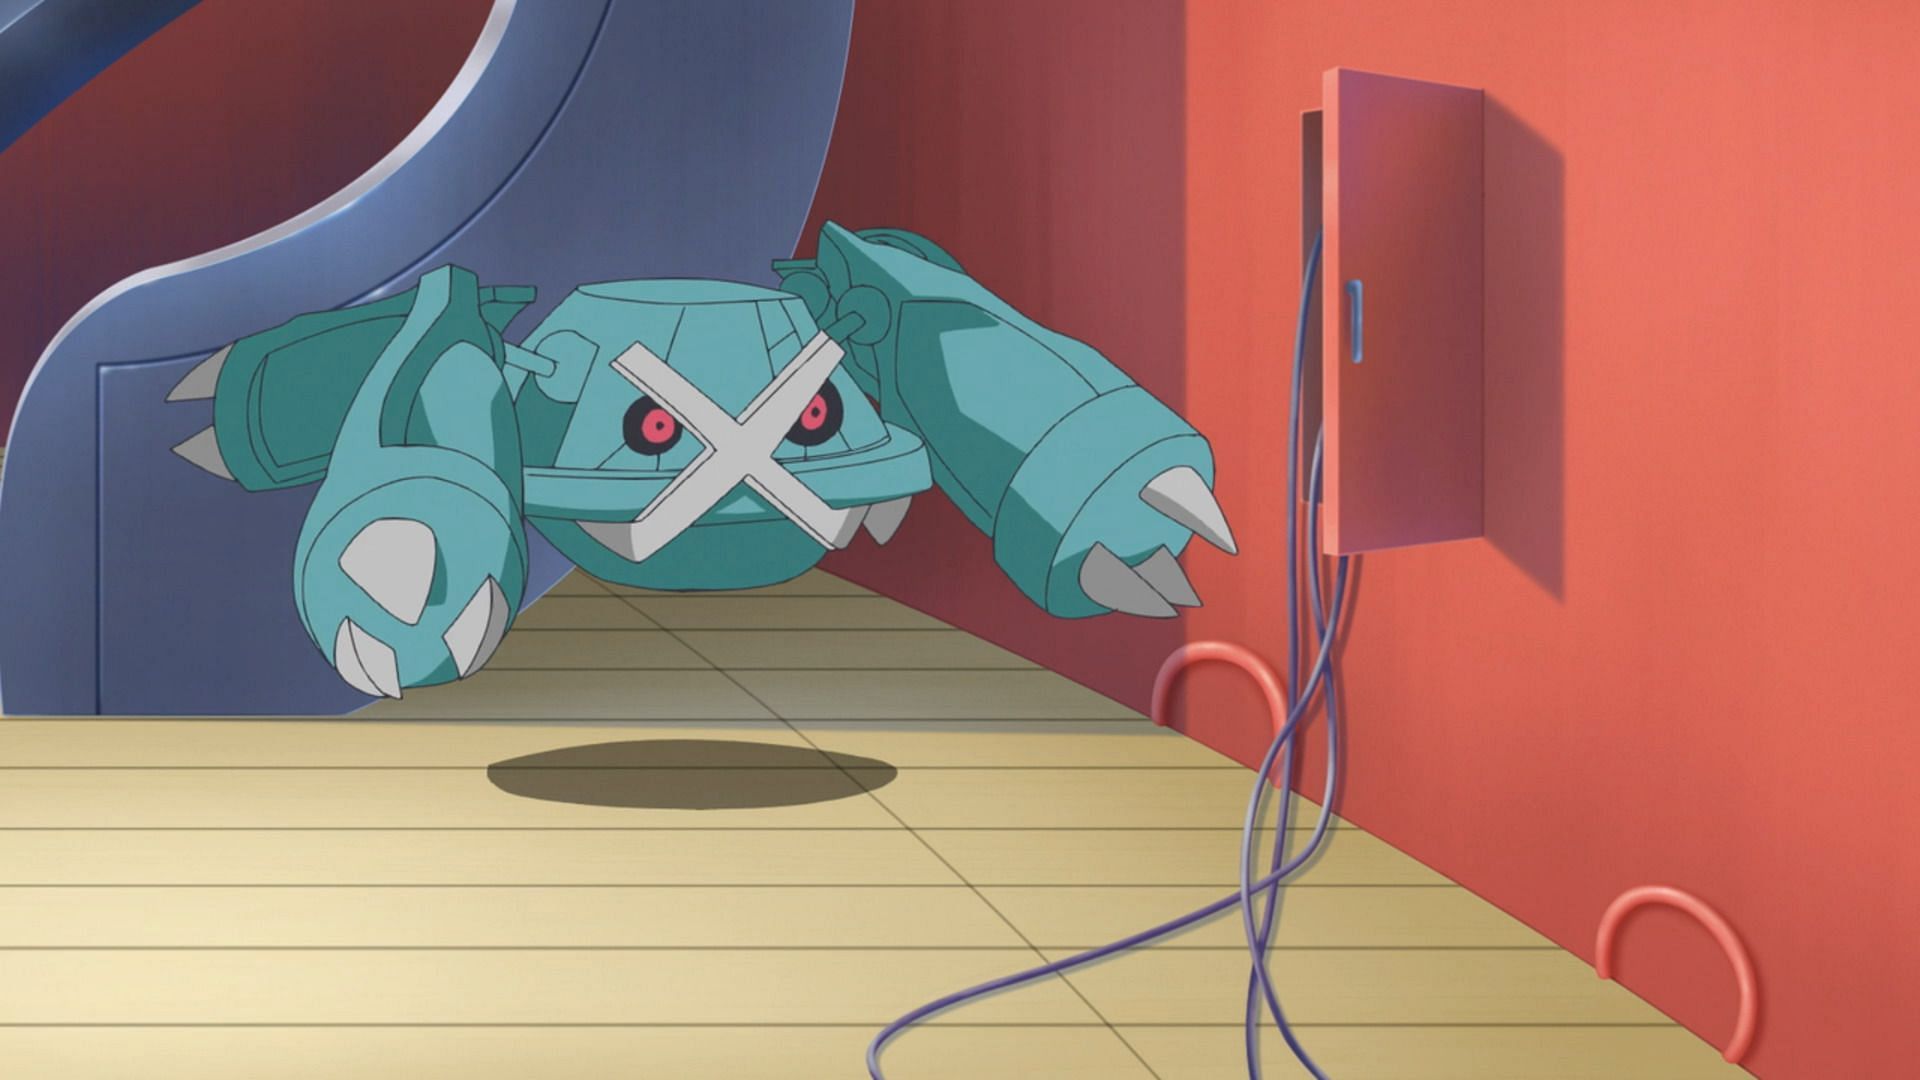 Metagross as it appears in the anime (Image via The Pokemon Company)